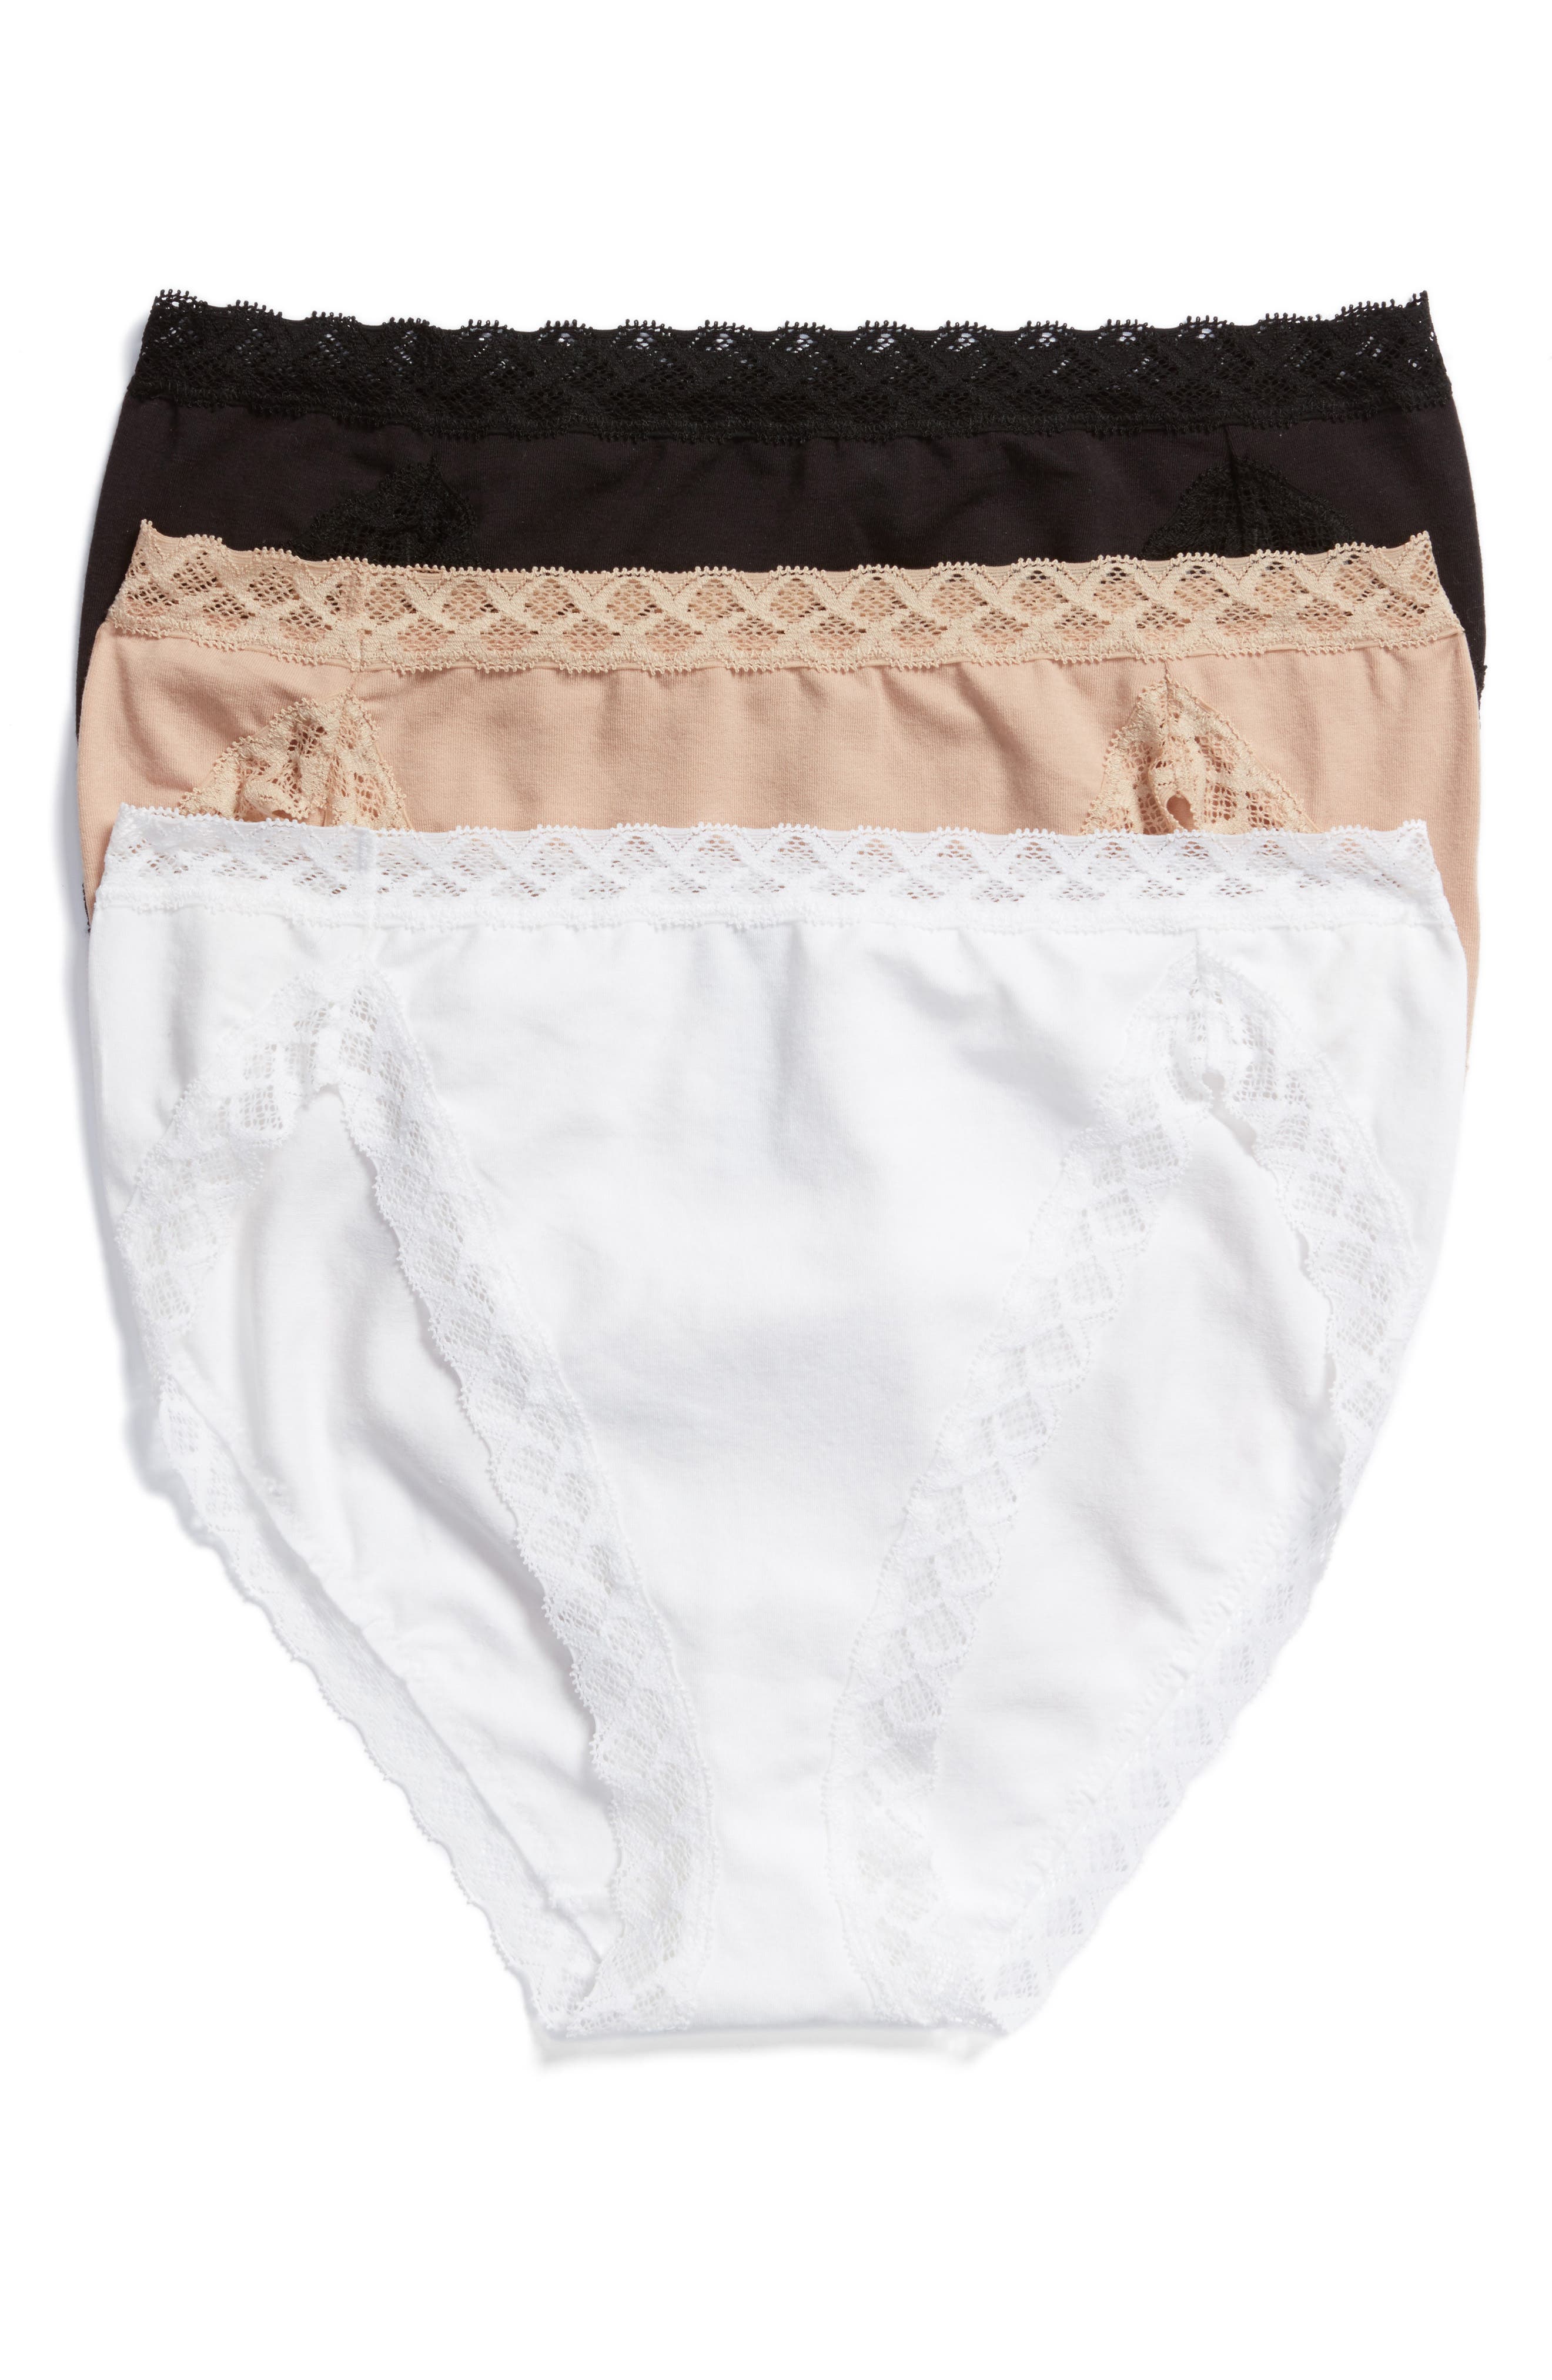 Natori Bliss 3-Pack French Cut Briefs in Black/Cafe/White at Nordstrom